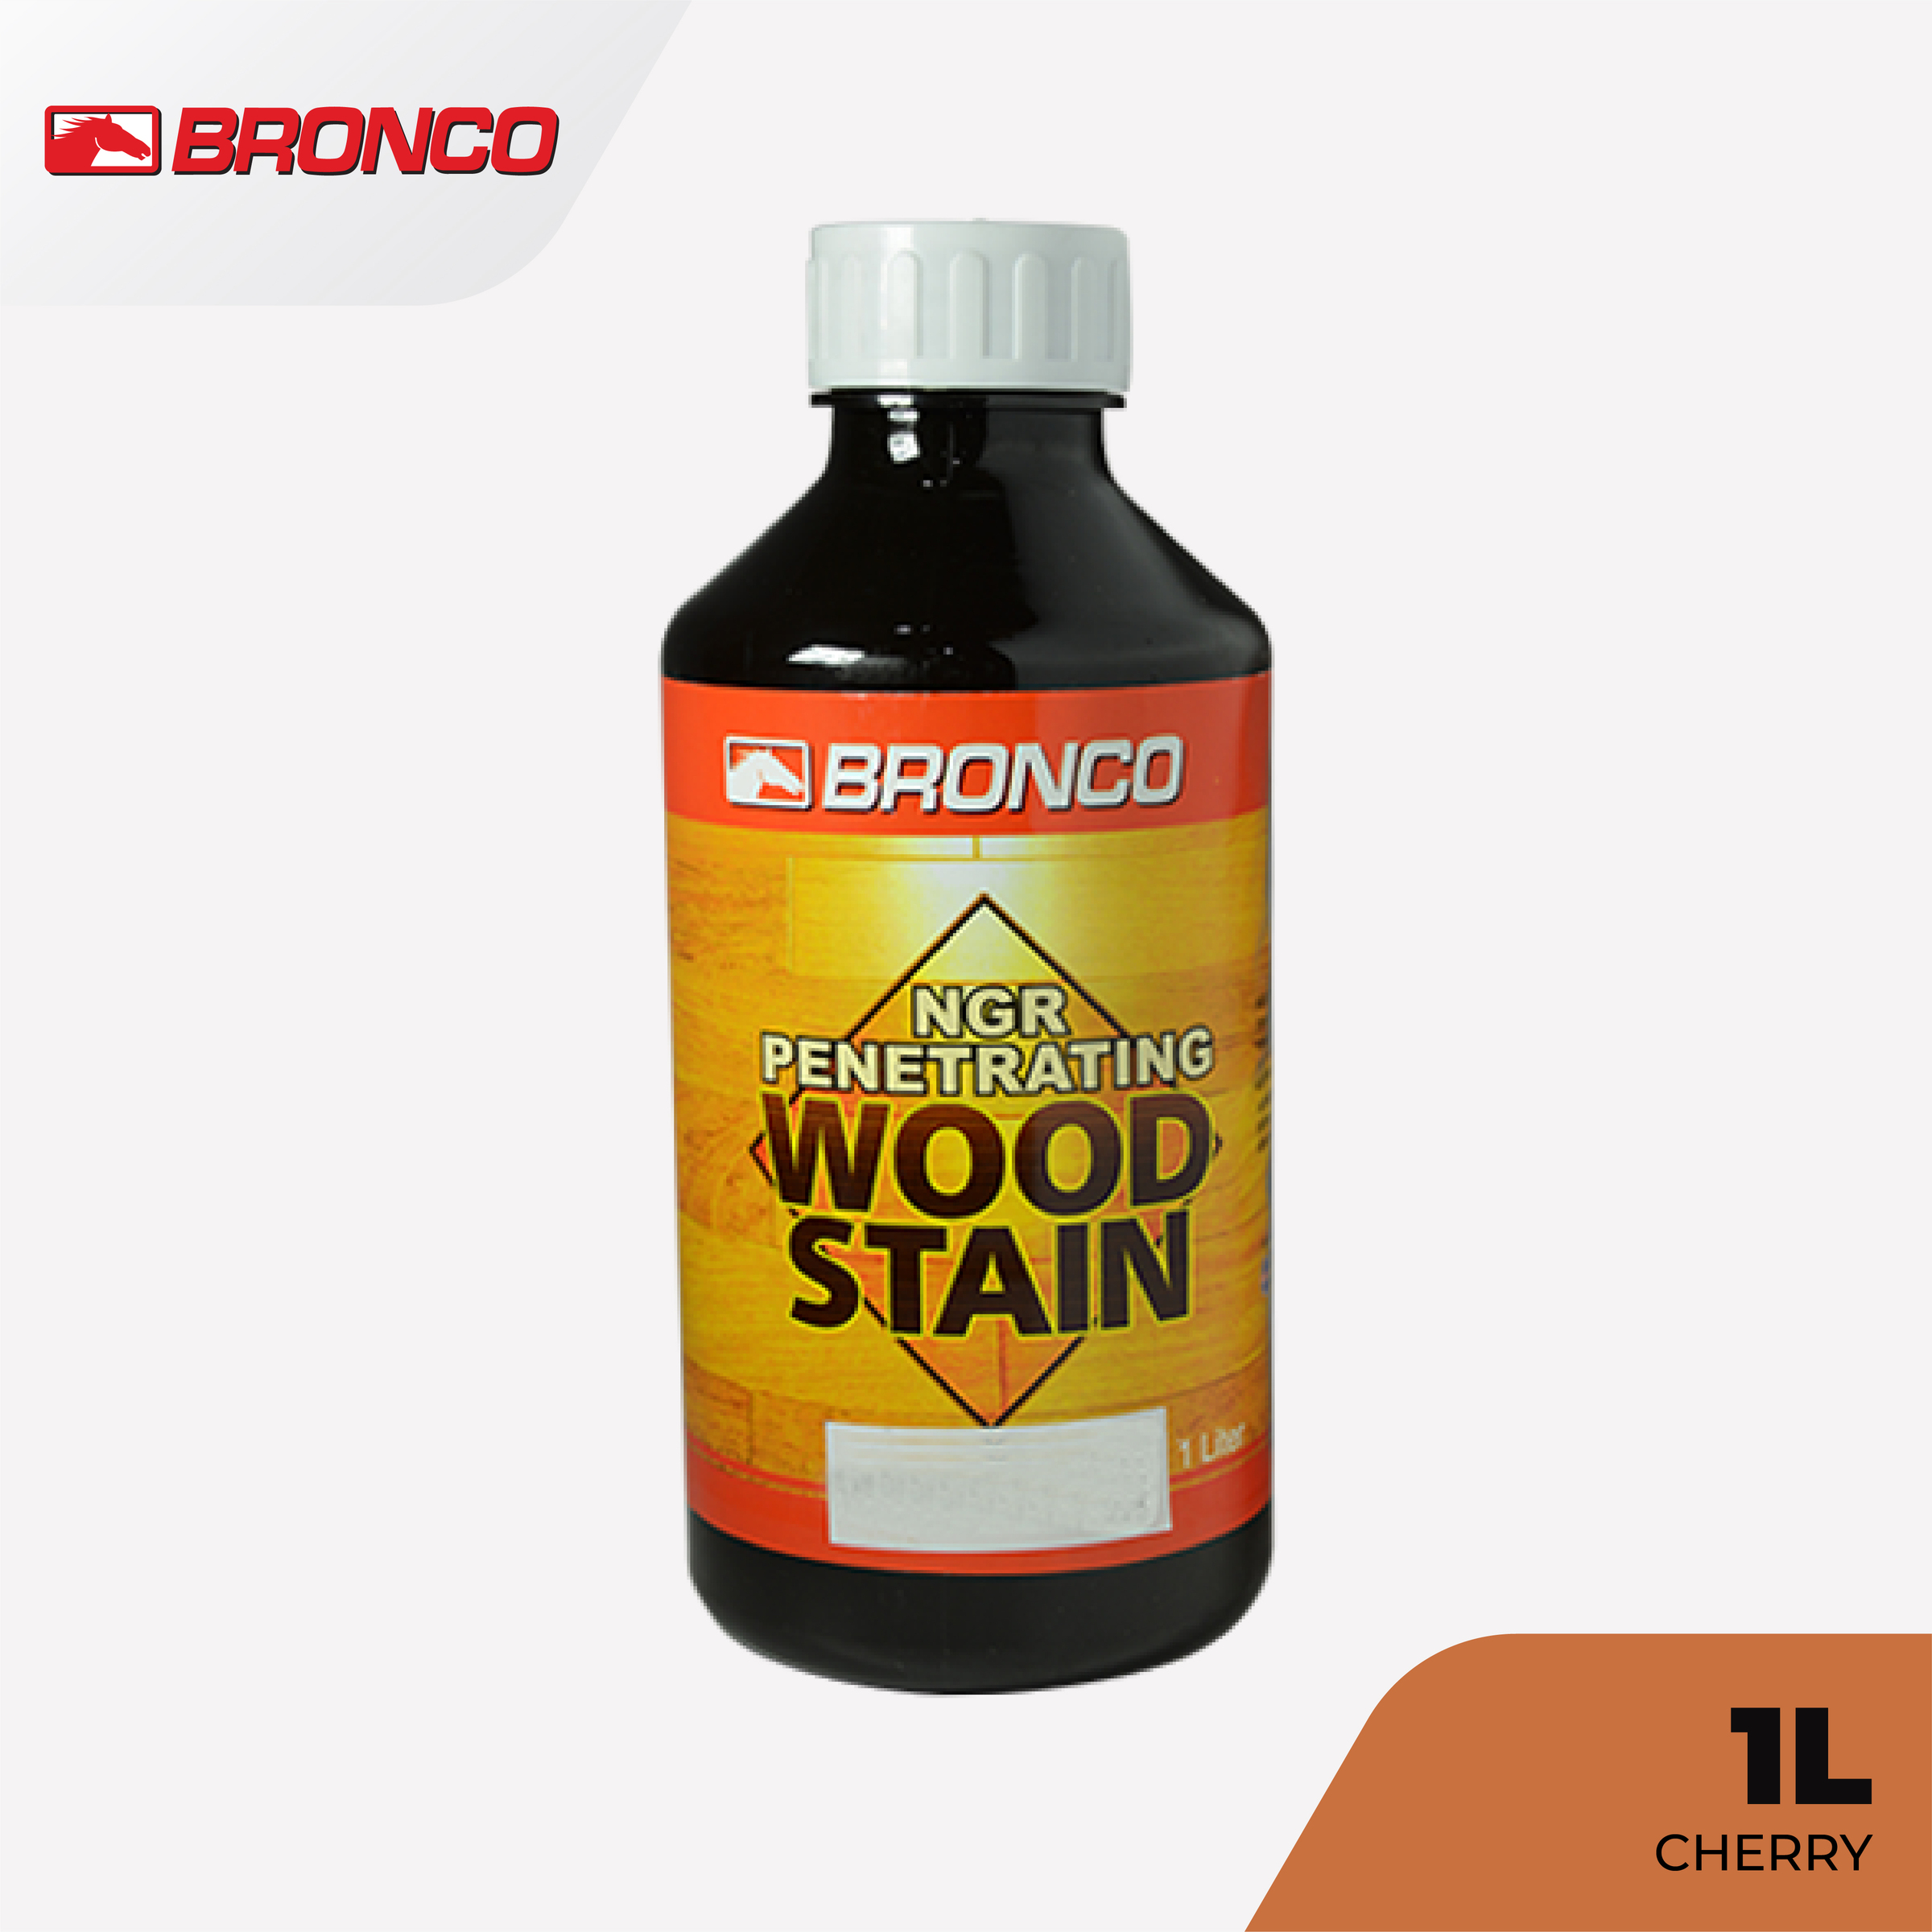 Bronco NGR Penetrating Wood Stain Cherry - 1L